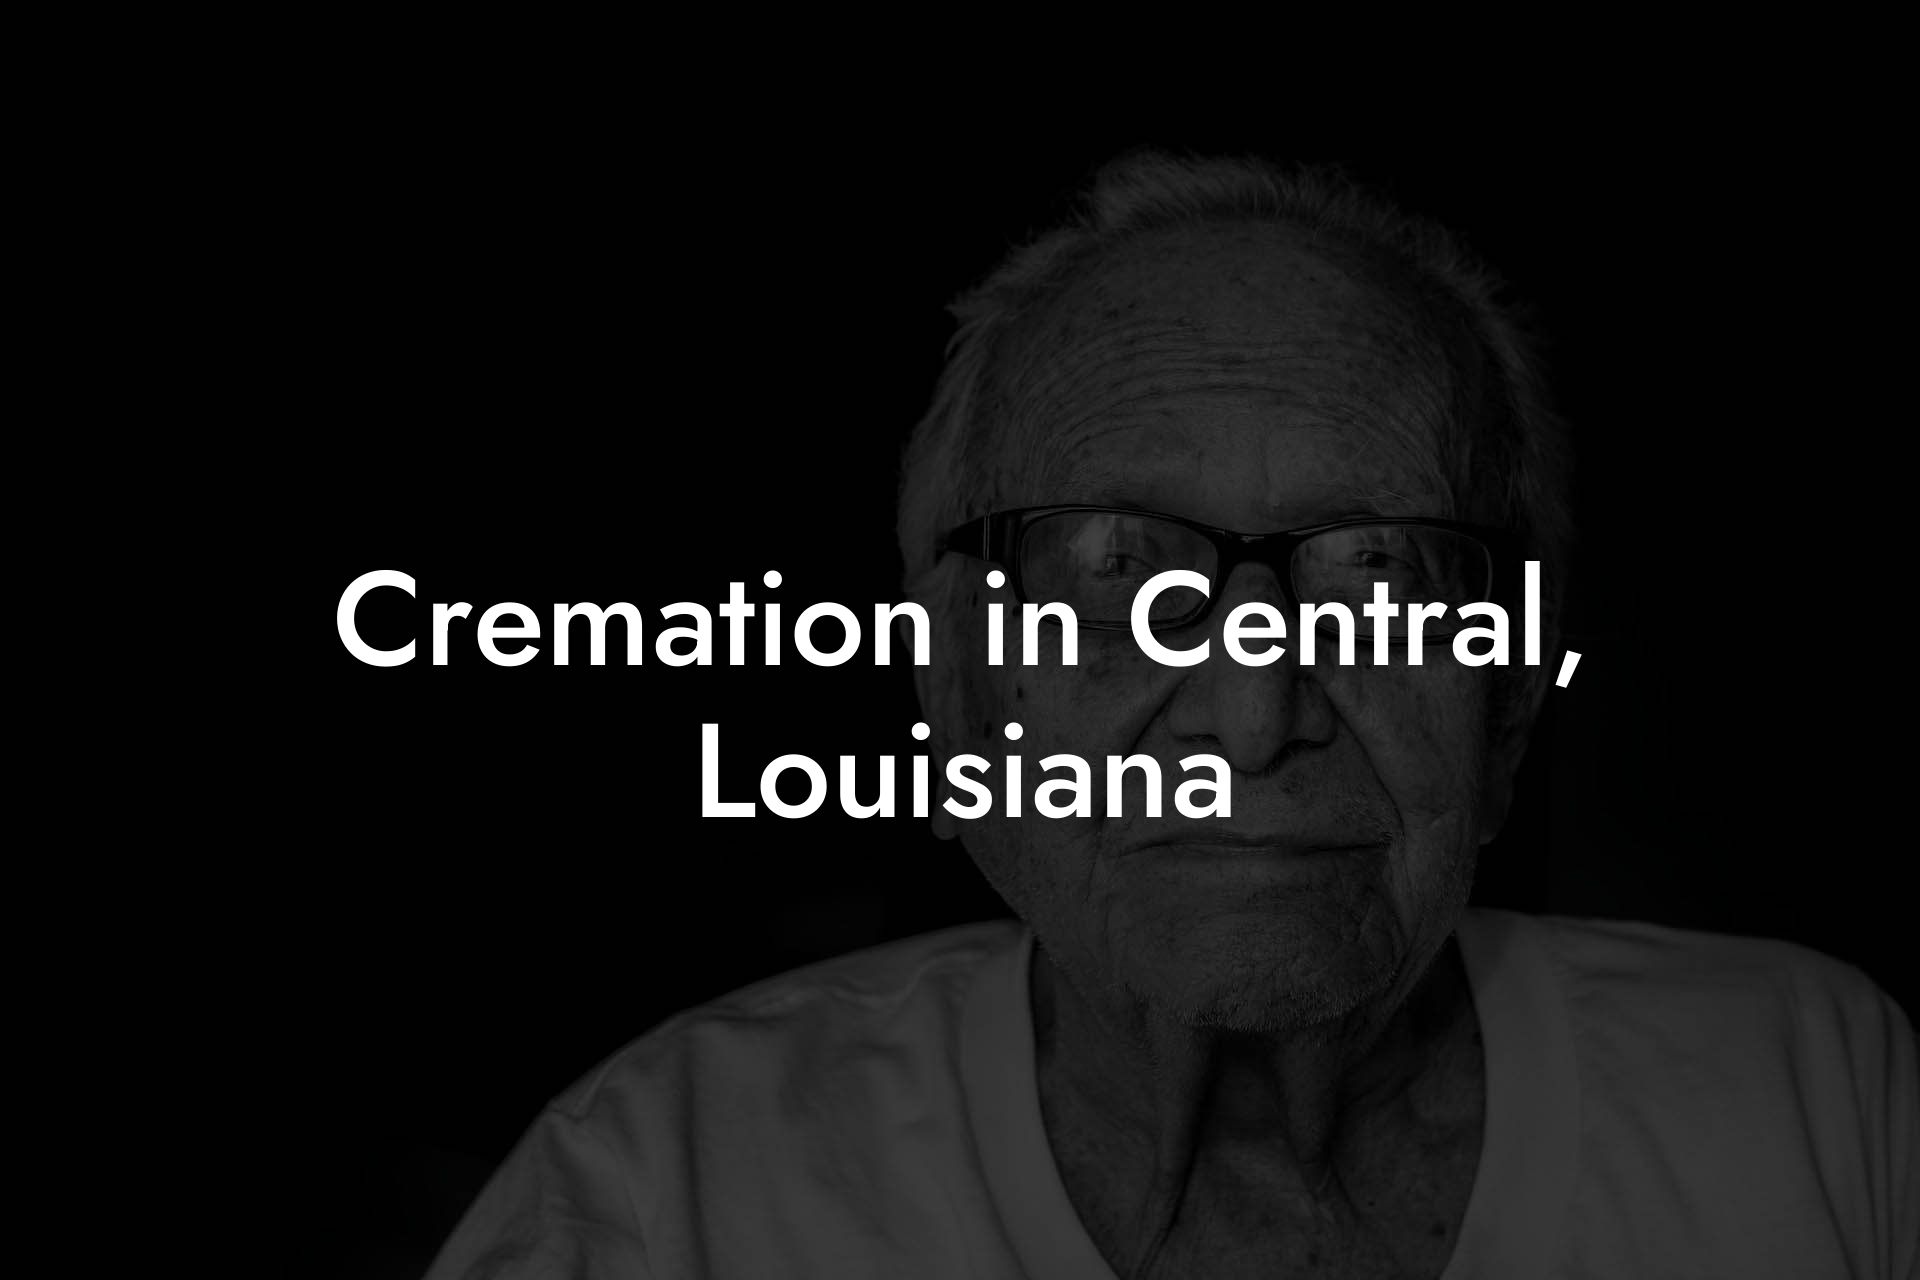 Cremation in Central, Louisiana